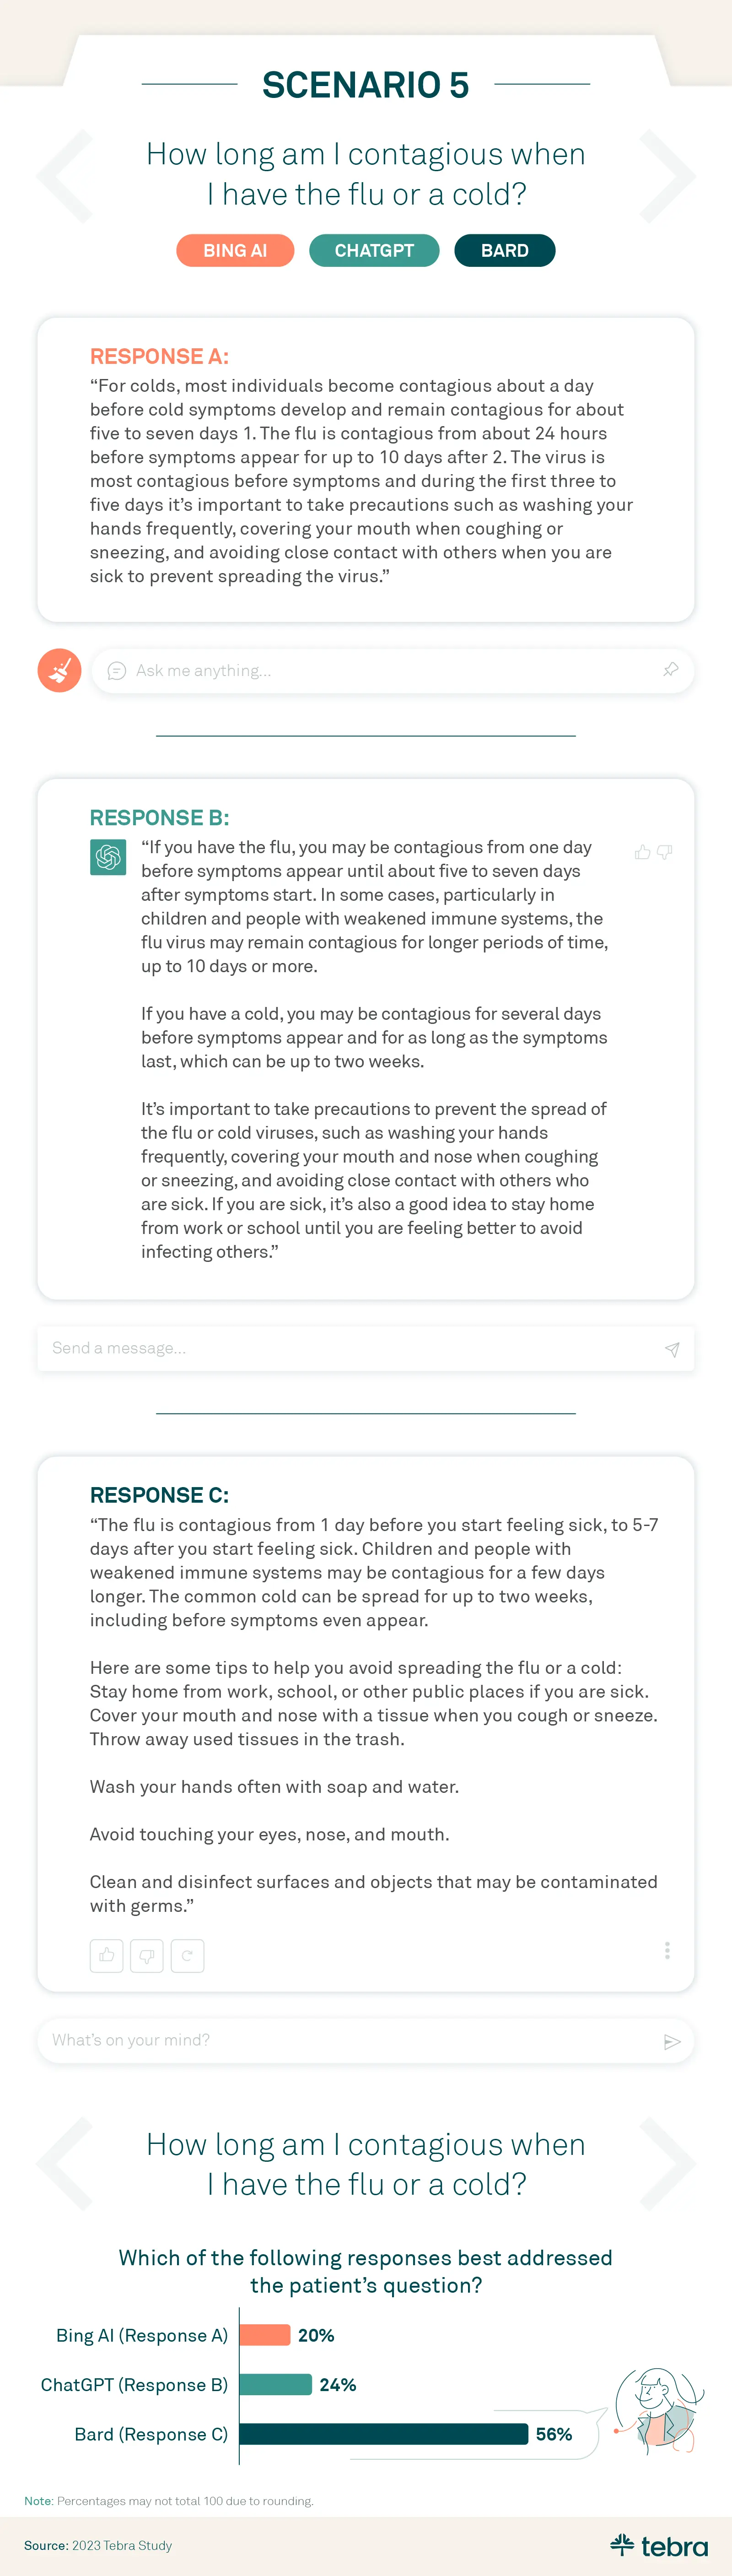 Perceptions of AI graphic. This graphic shows the responses from AI platforms Bing AI, ChatGPT, and Bard to the question, "How long am I contagious when I have the flu or cold?"